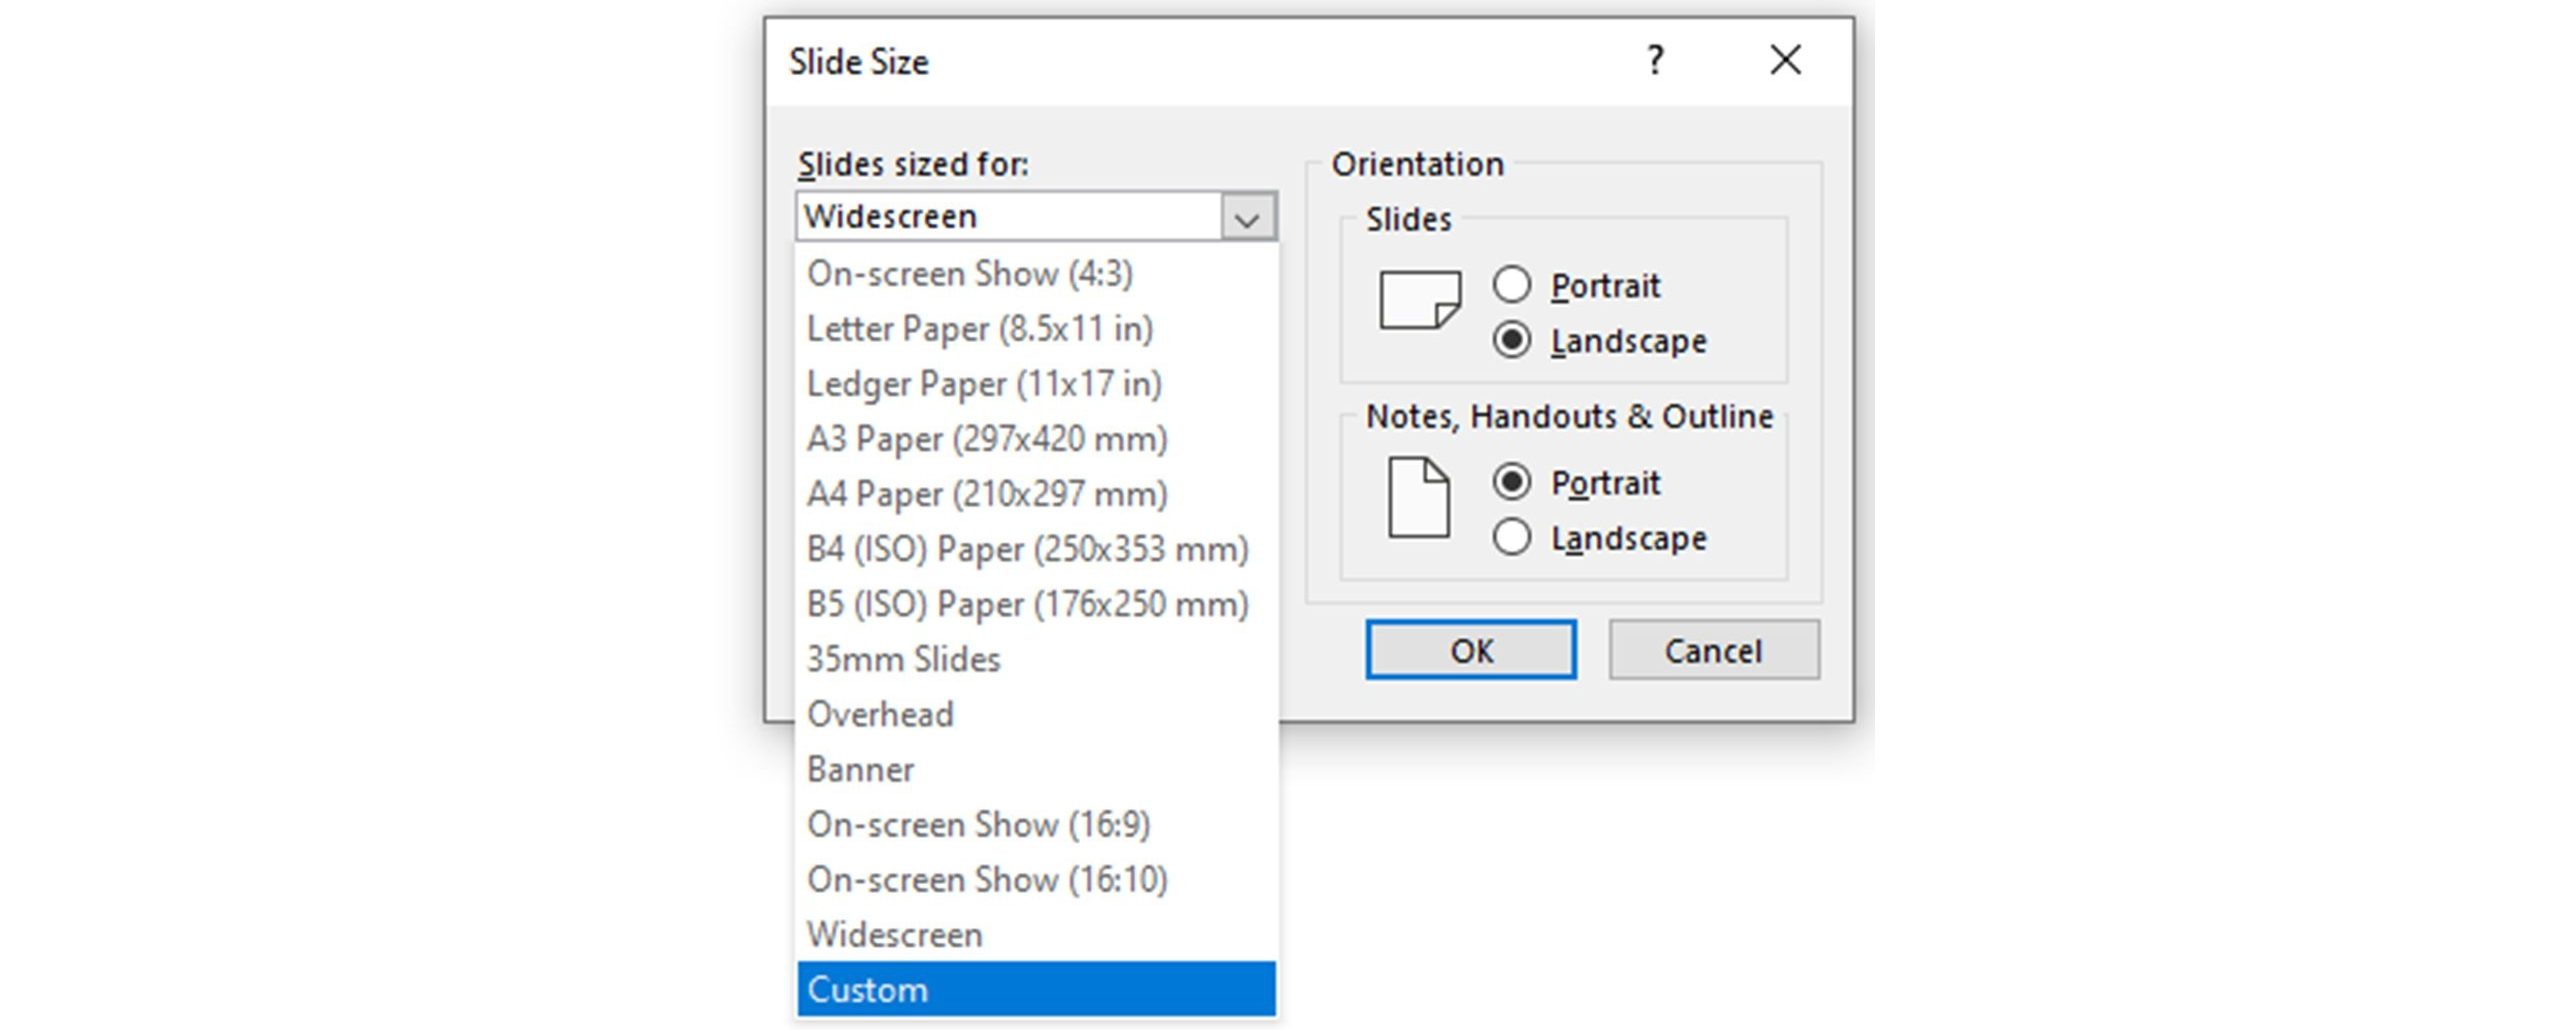 Slide size pop up with 'Slides sized for:' drop down open